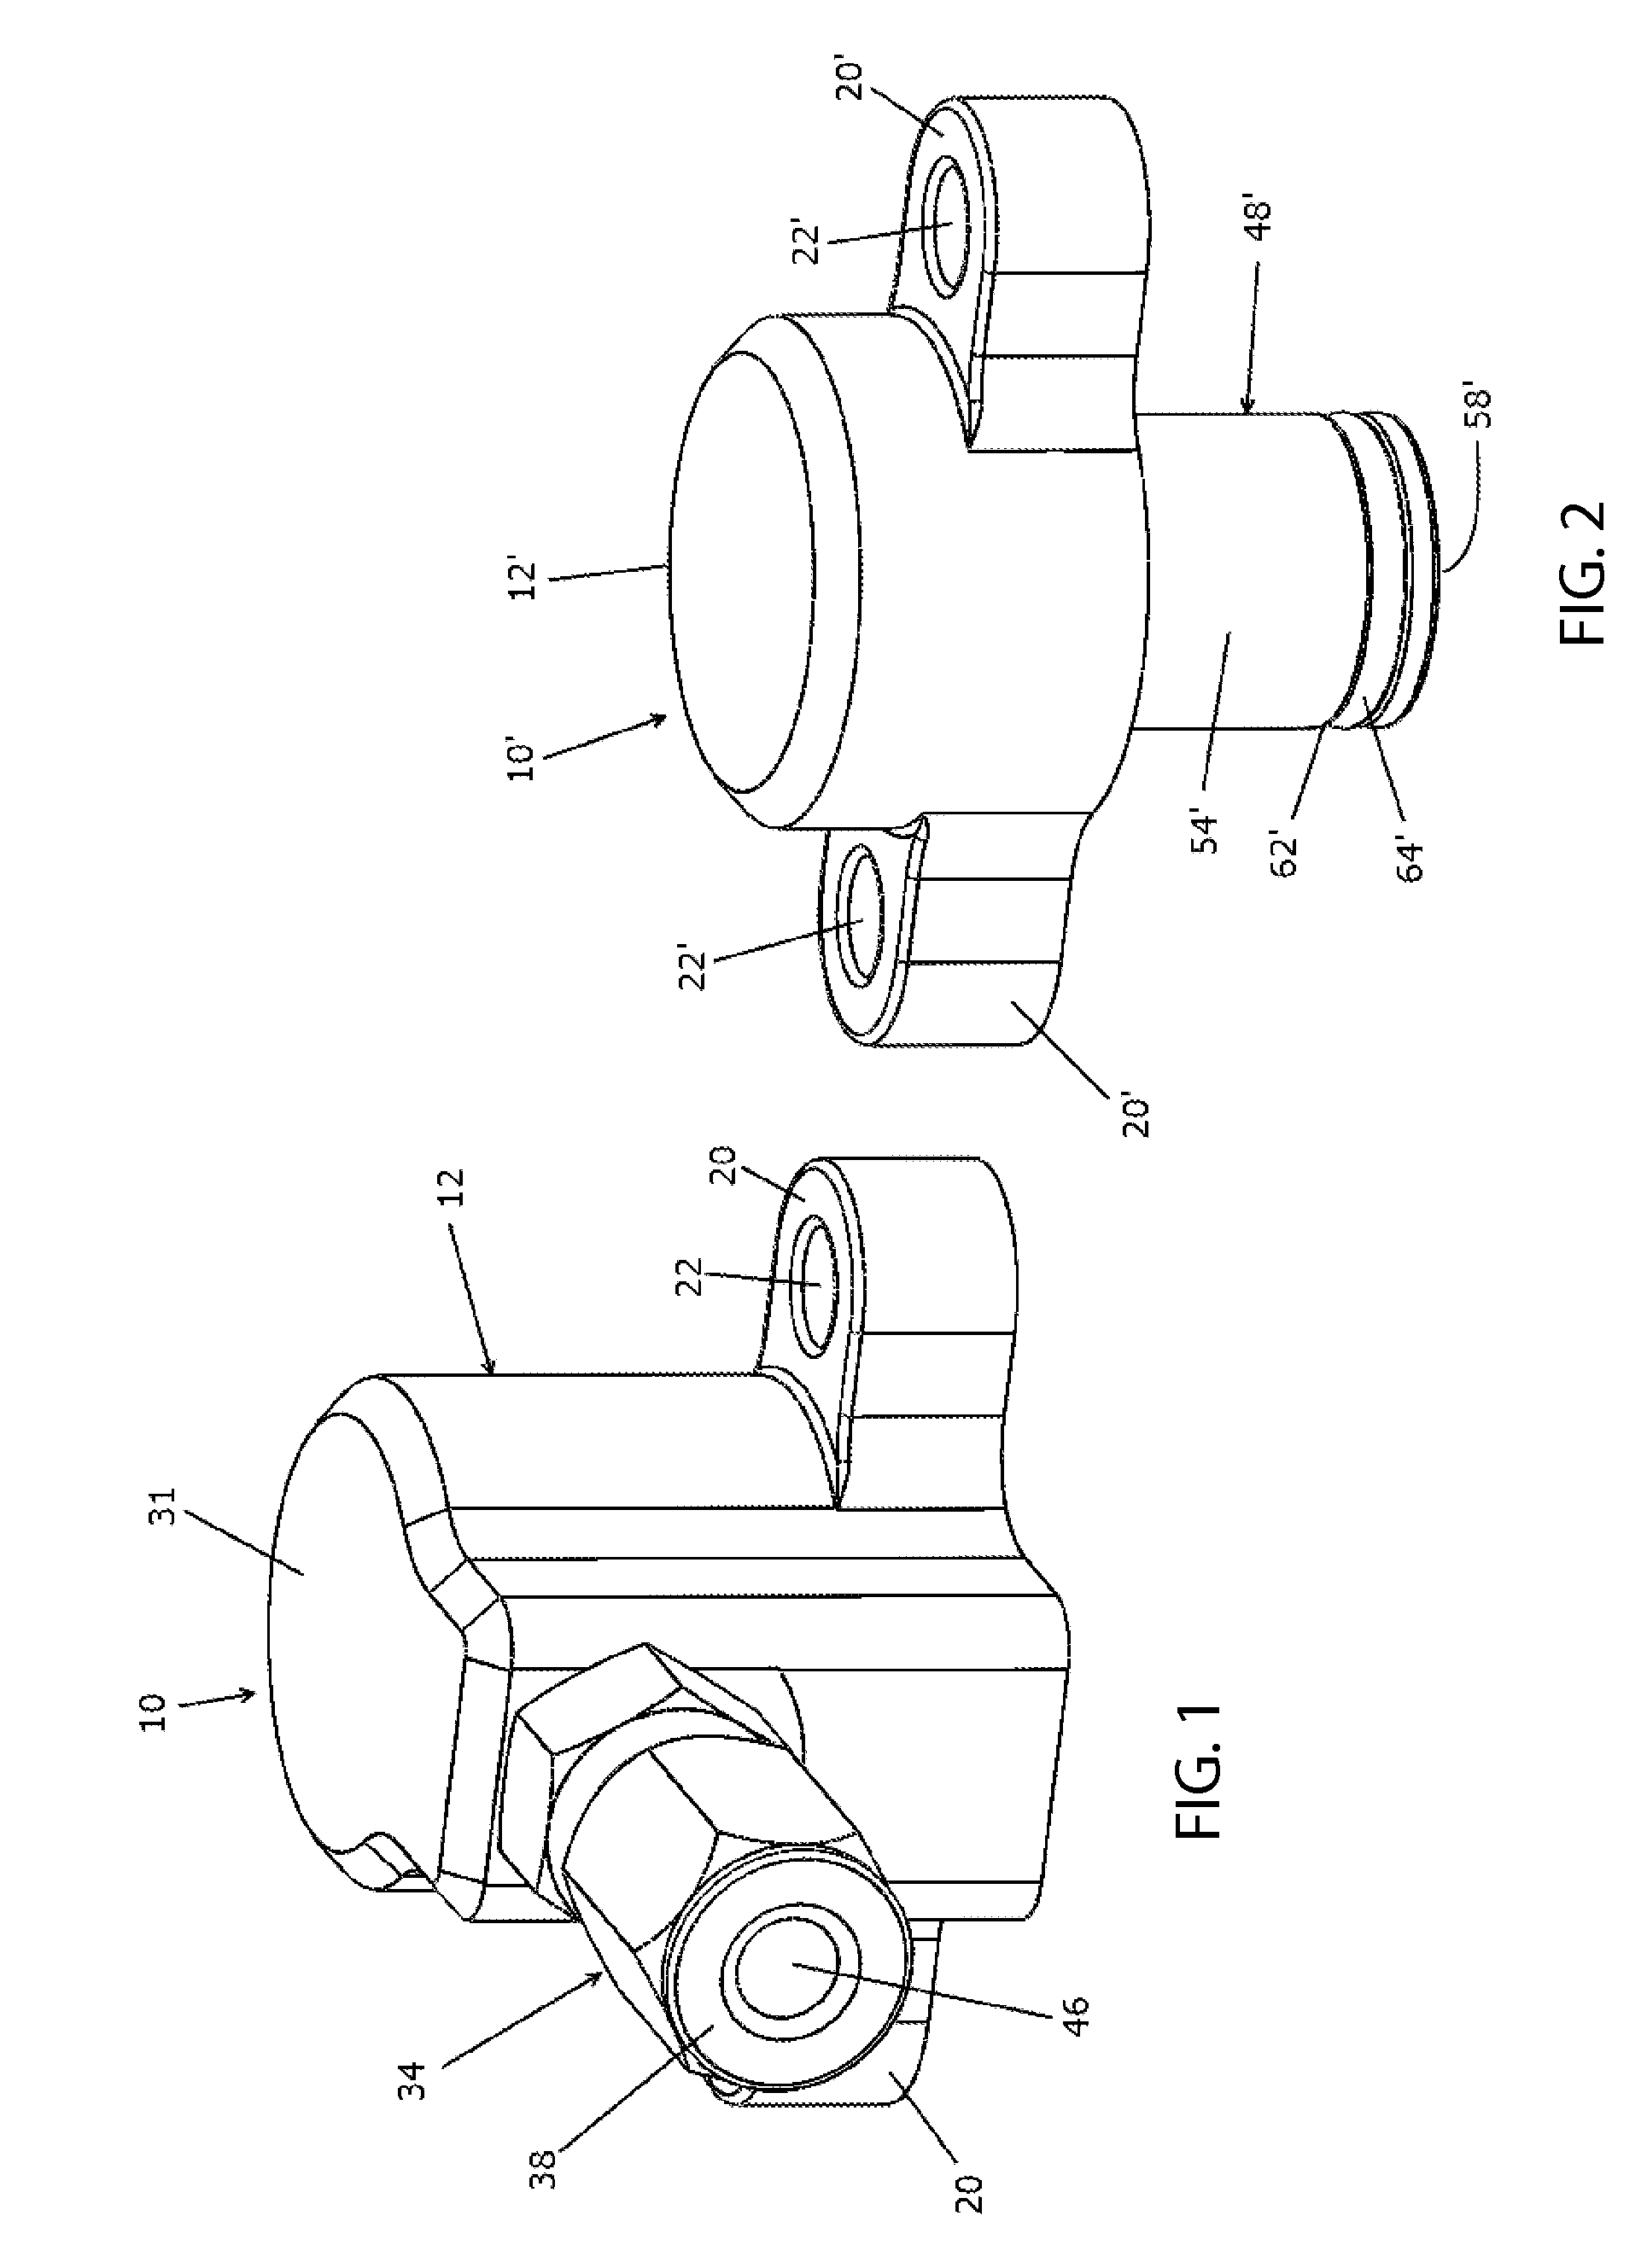 Central Tire Inflation Wheel Assembly and Valve